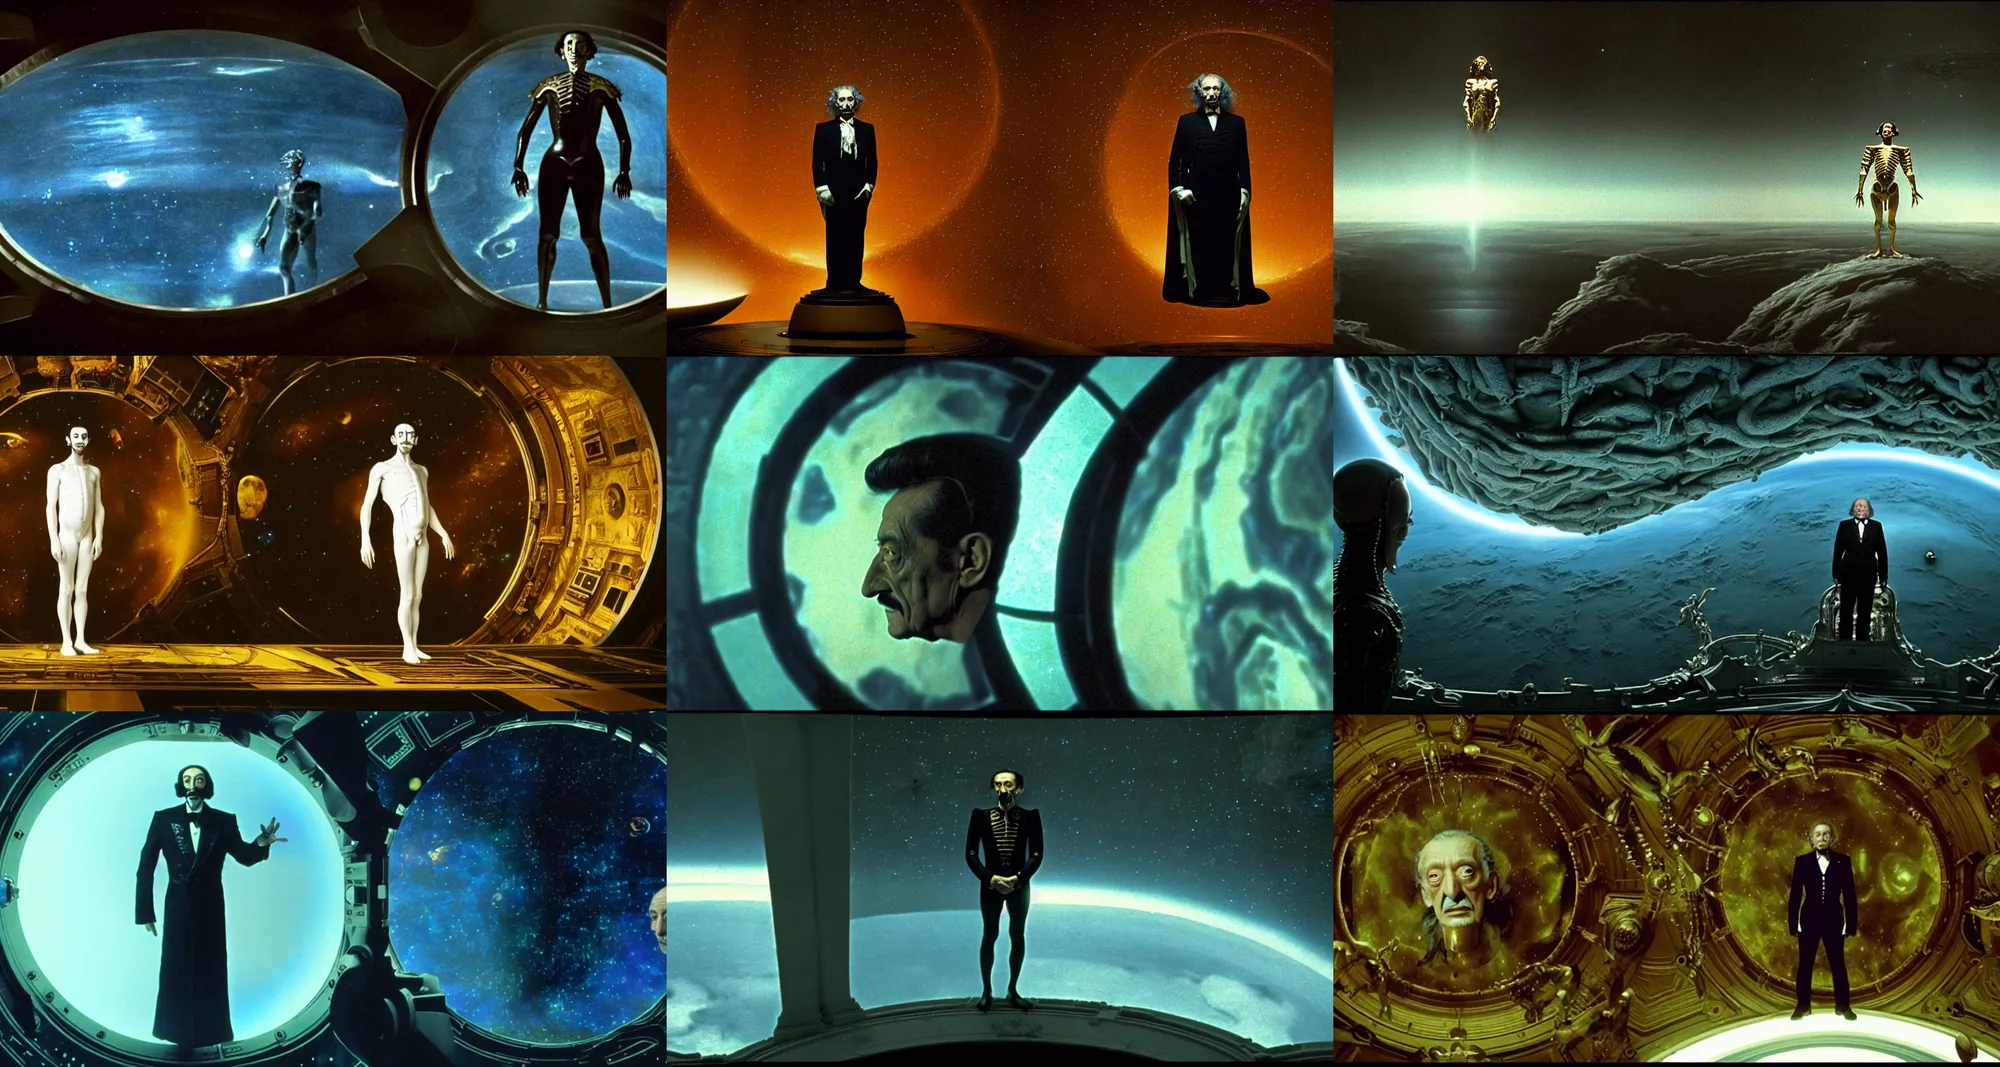 Prompt: the full body shot of arrogant salvador dali in the role of emperor of universe | porthole in the wall of palace with the space view | still frame from the prometheus movie by ridley scott with cinematogrophy of christopher doyle and art direction by hans giger, anamorphic bokeh and lens flares, 8 k, higly detailed masterpiece